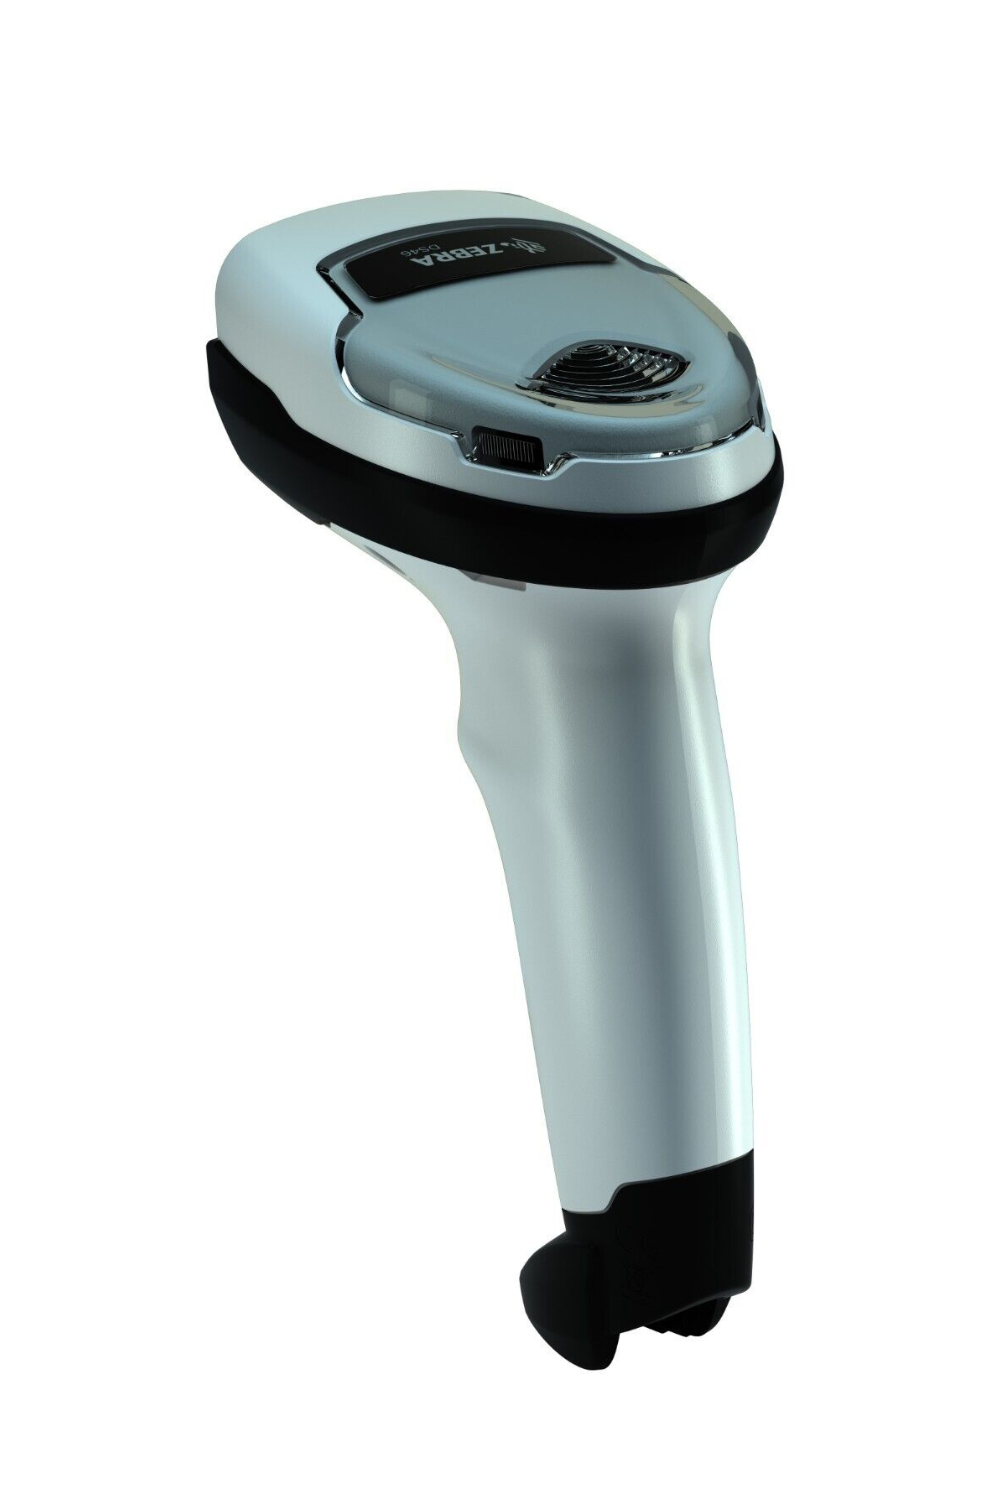 Zebra DS4608 Barcode Scanner - 2D - Healthcare and retail (Brand New)